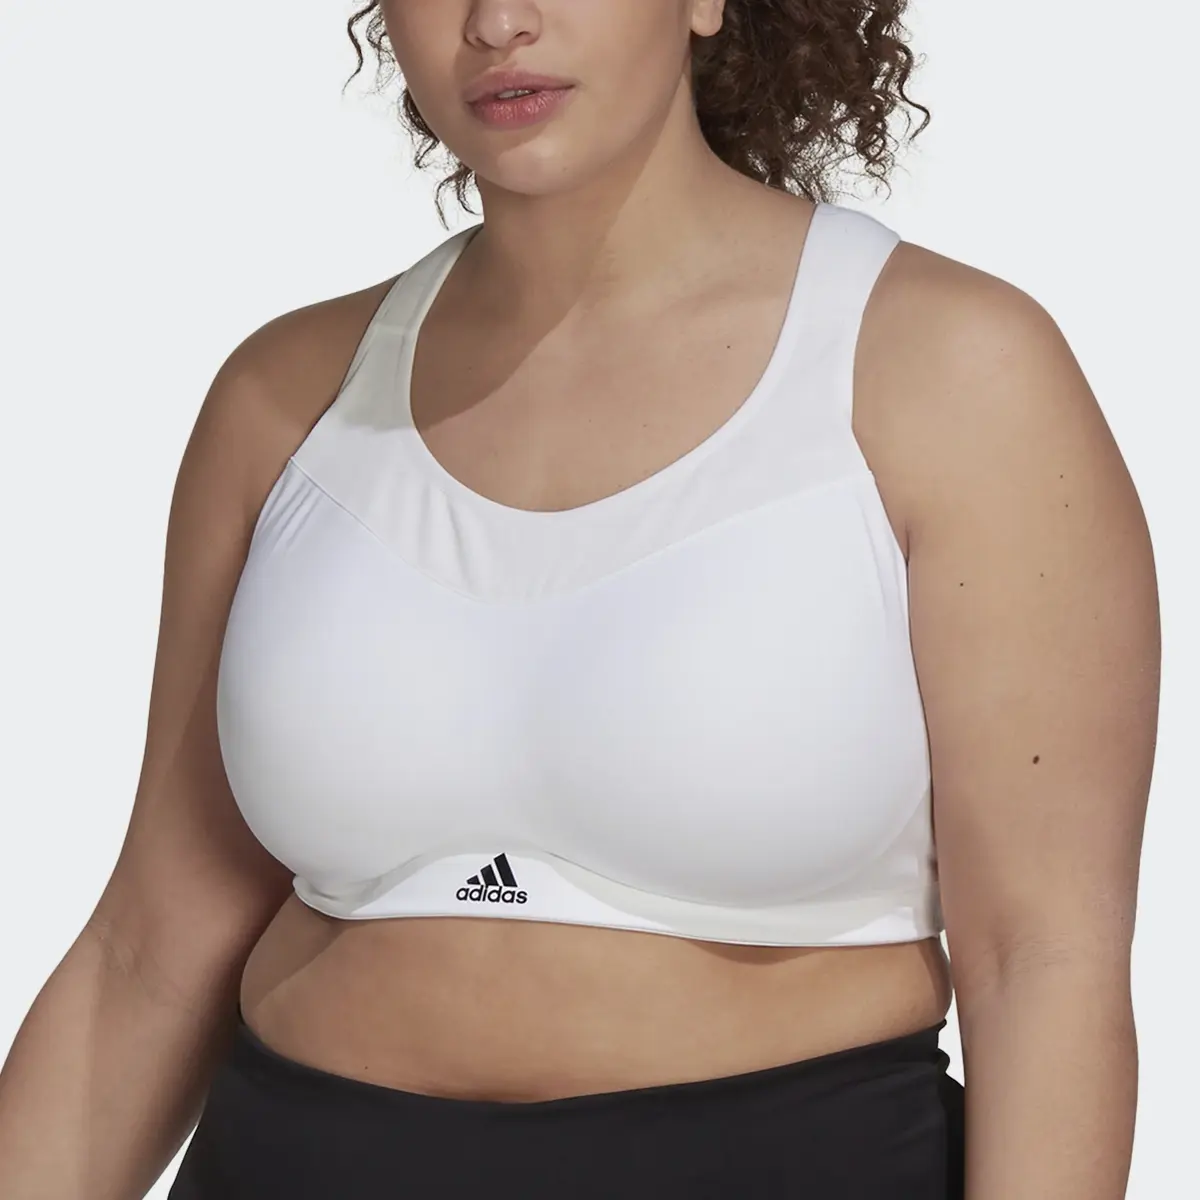 Adidas Brassière de training Maintien fort adidas TLRD Impact (Grandes tailles). 1